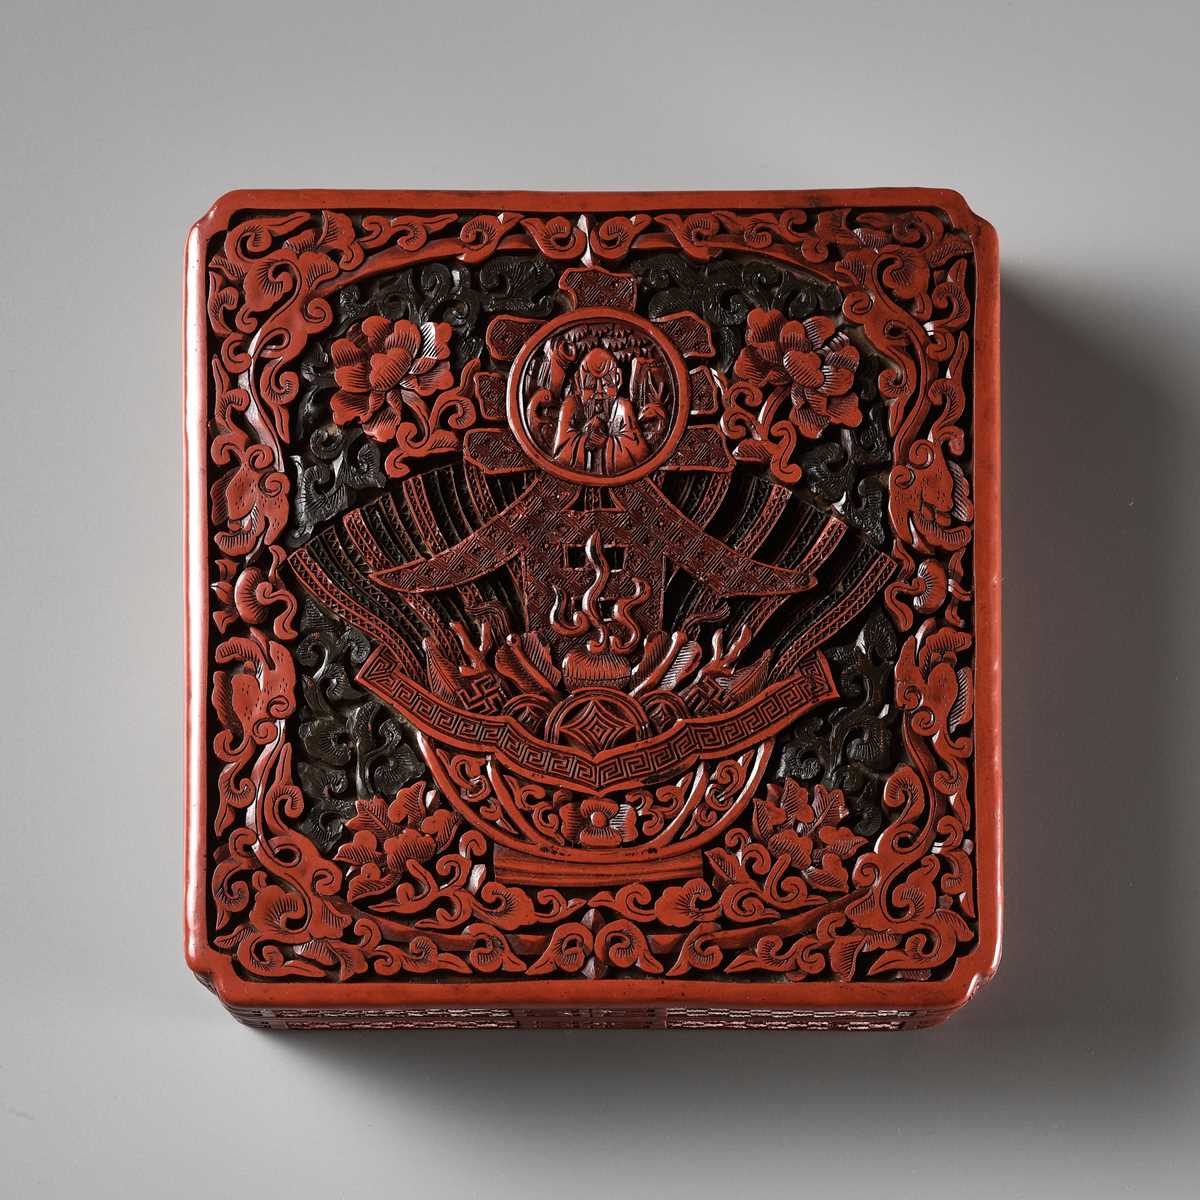 Lot 3 - A SQUARE THREE-COLOR LACQUER ‘CHUN’ SPRING BOX AND COVER, QING DYNASTY